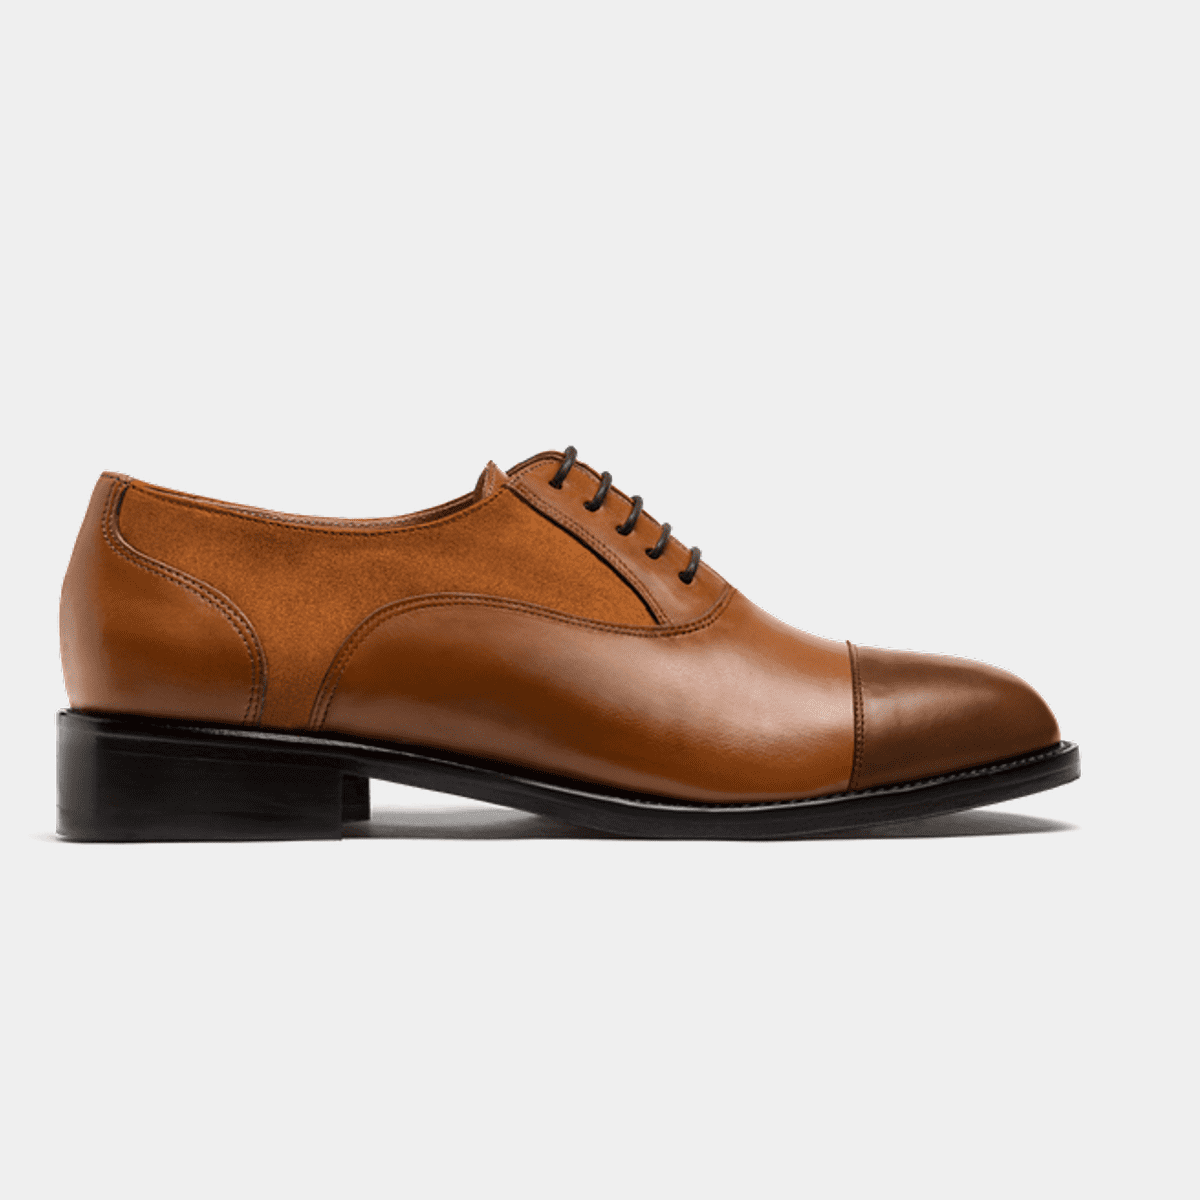 Cap toe Oxford dress shoes - brown leather & suede | Sumissura